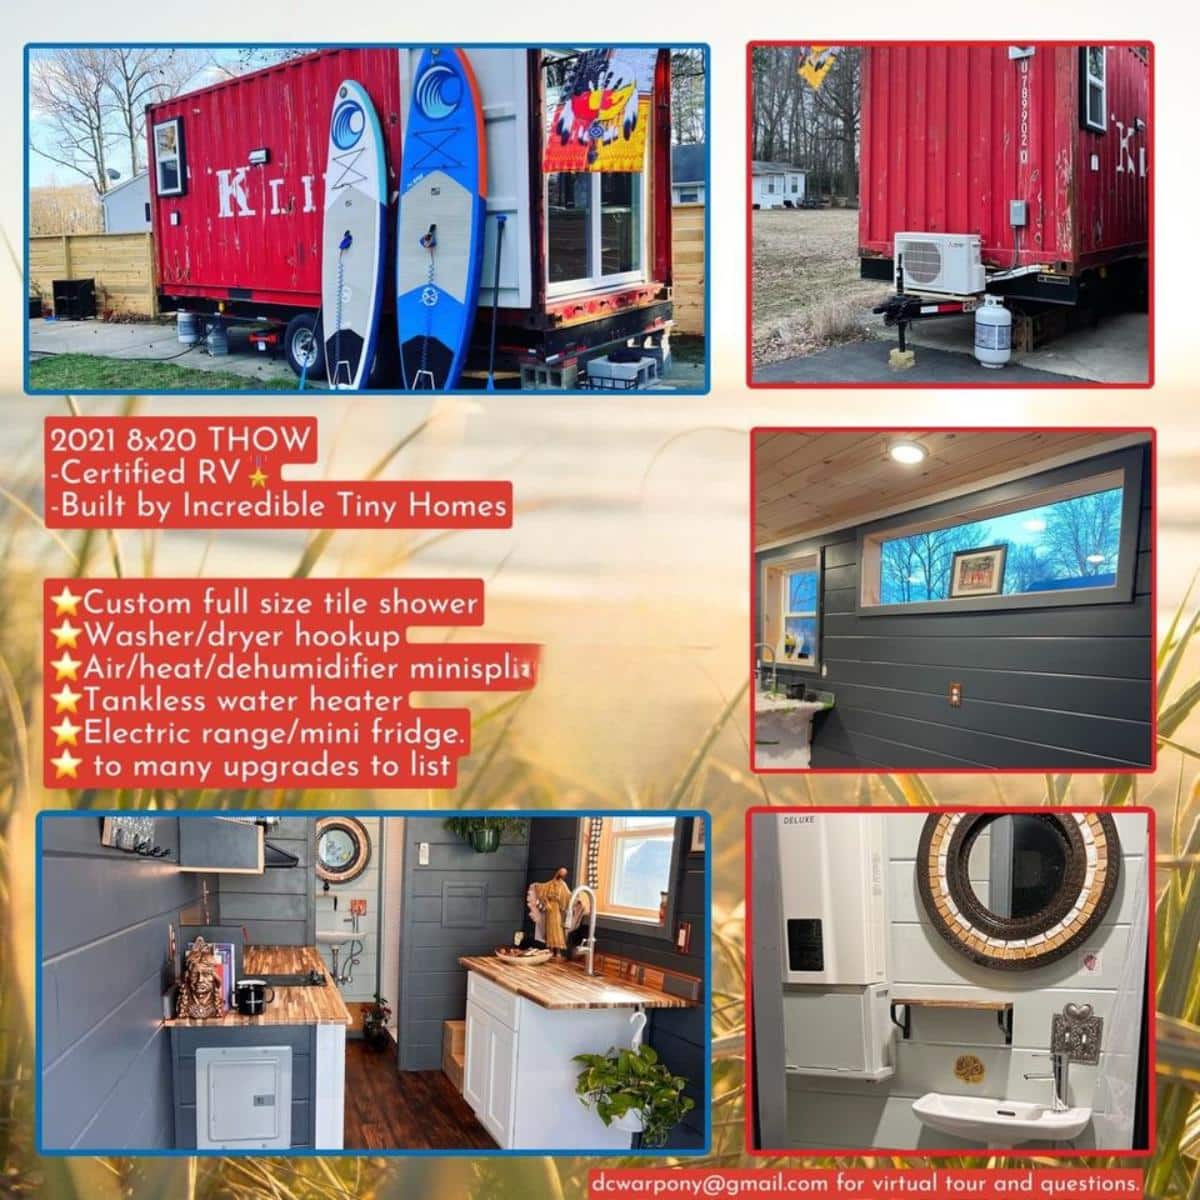 highlights of super tiny home in collage